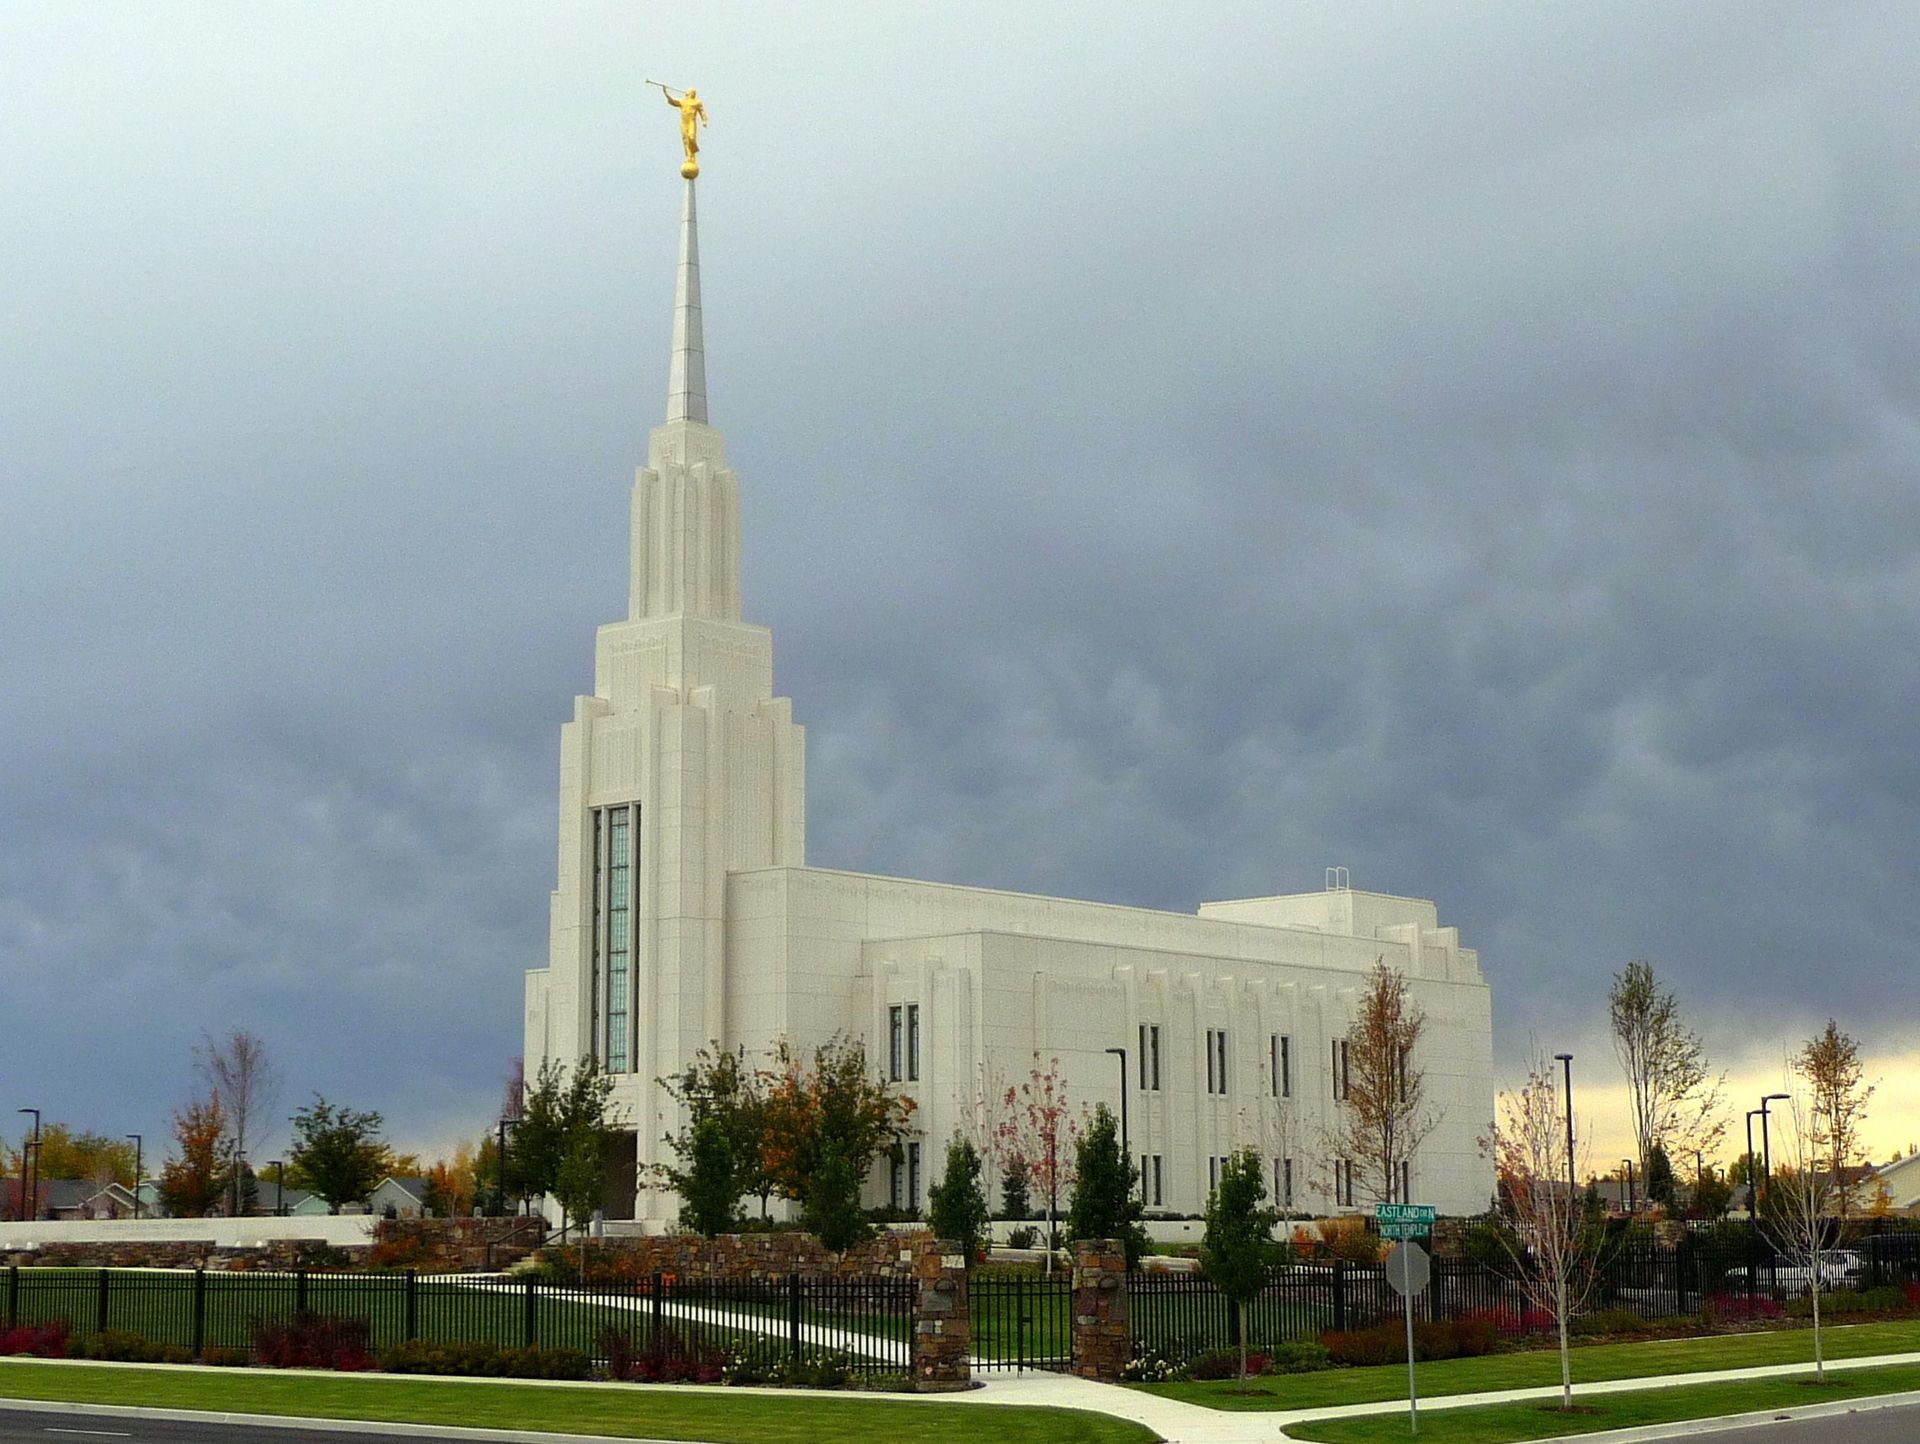 The entire Twin Falls Idaho Temple, including the entrance and scenery.